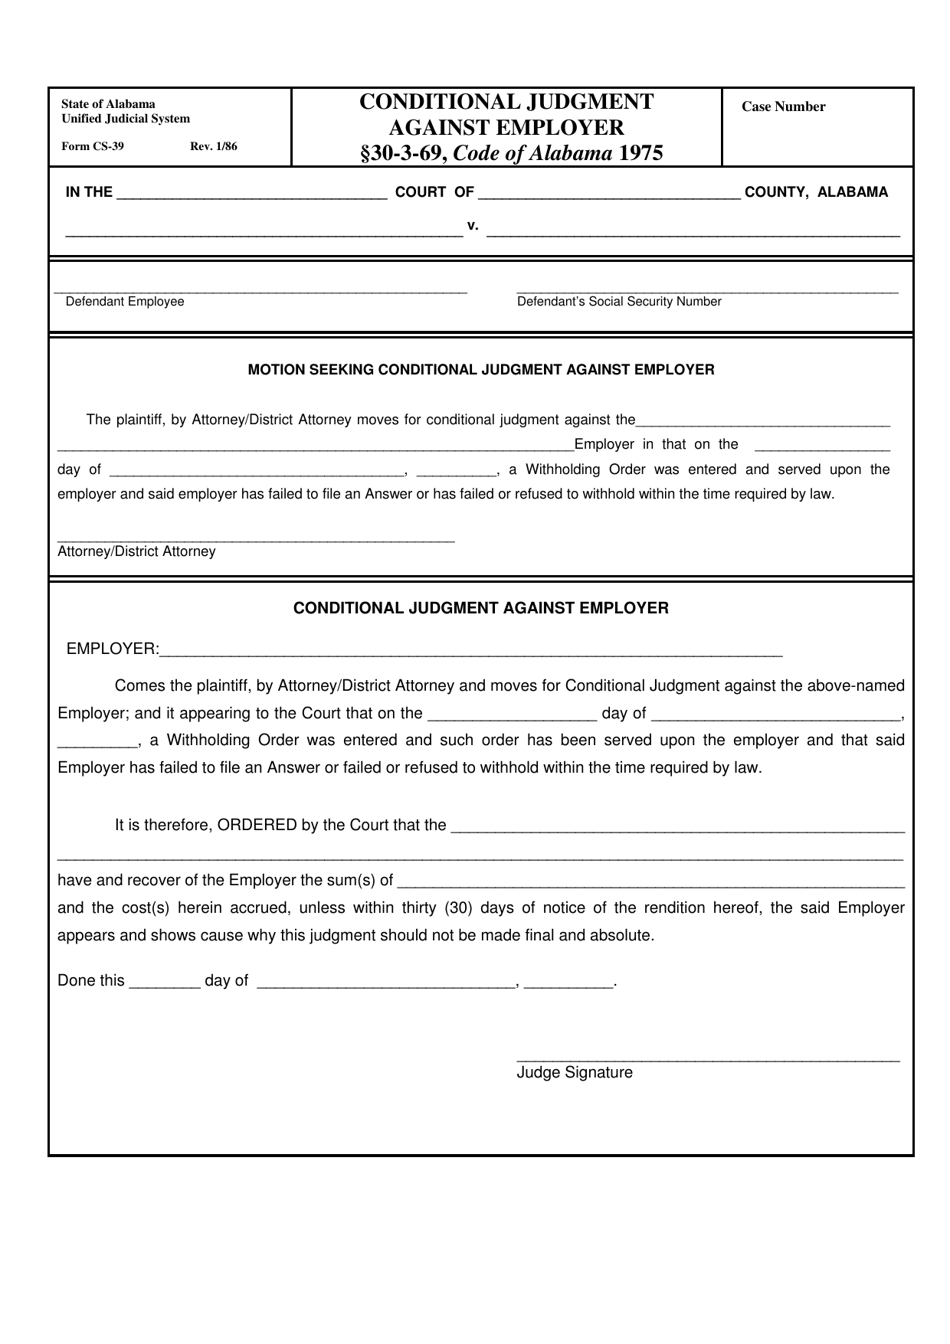 Form CS-39 Conditional Judgment Against Employer - Alabama, Page 1